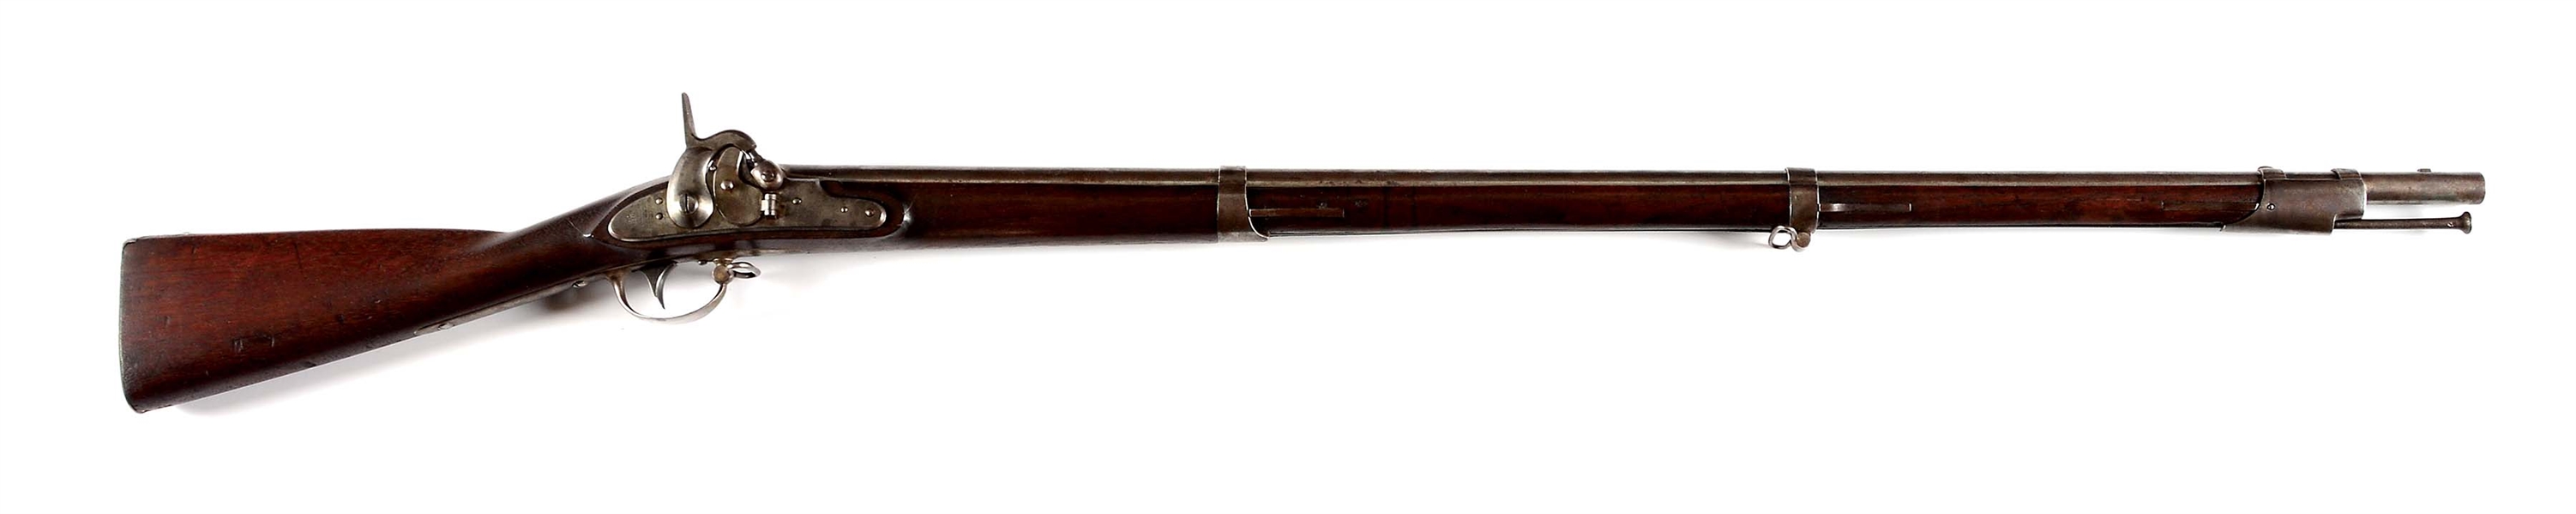 (A) RARE STATE OF NEW JERSEY CONTRACT REMINGTON ALTERATION RIFLED MUSKET.